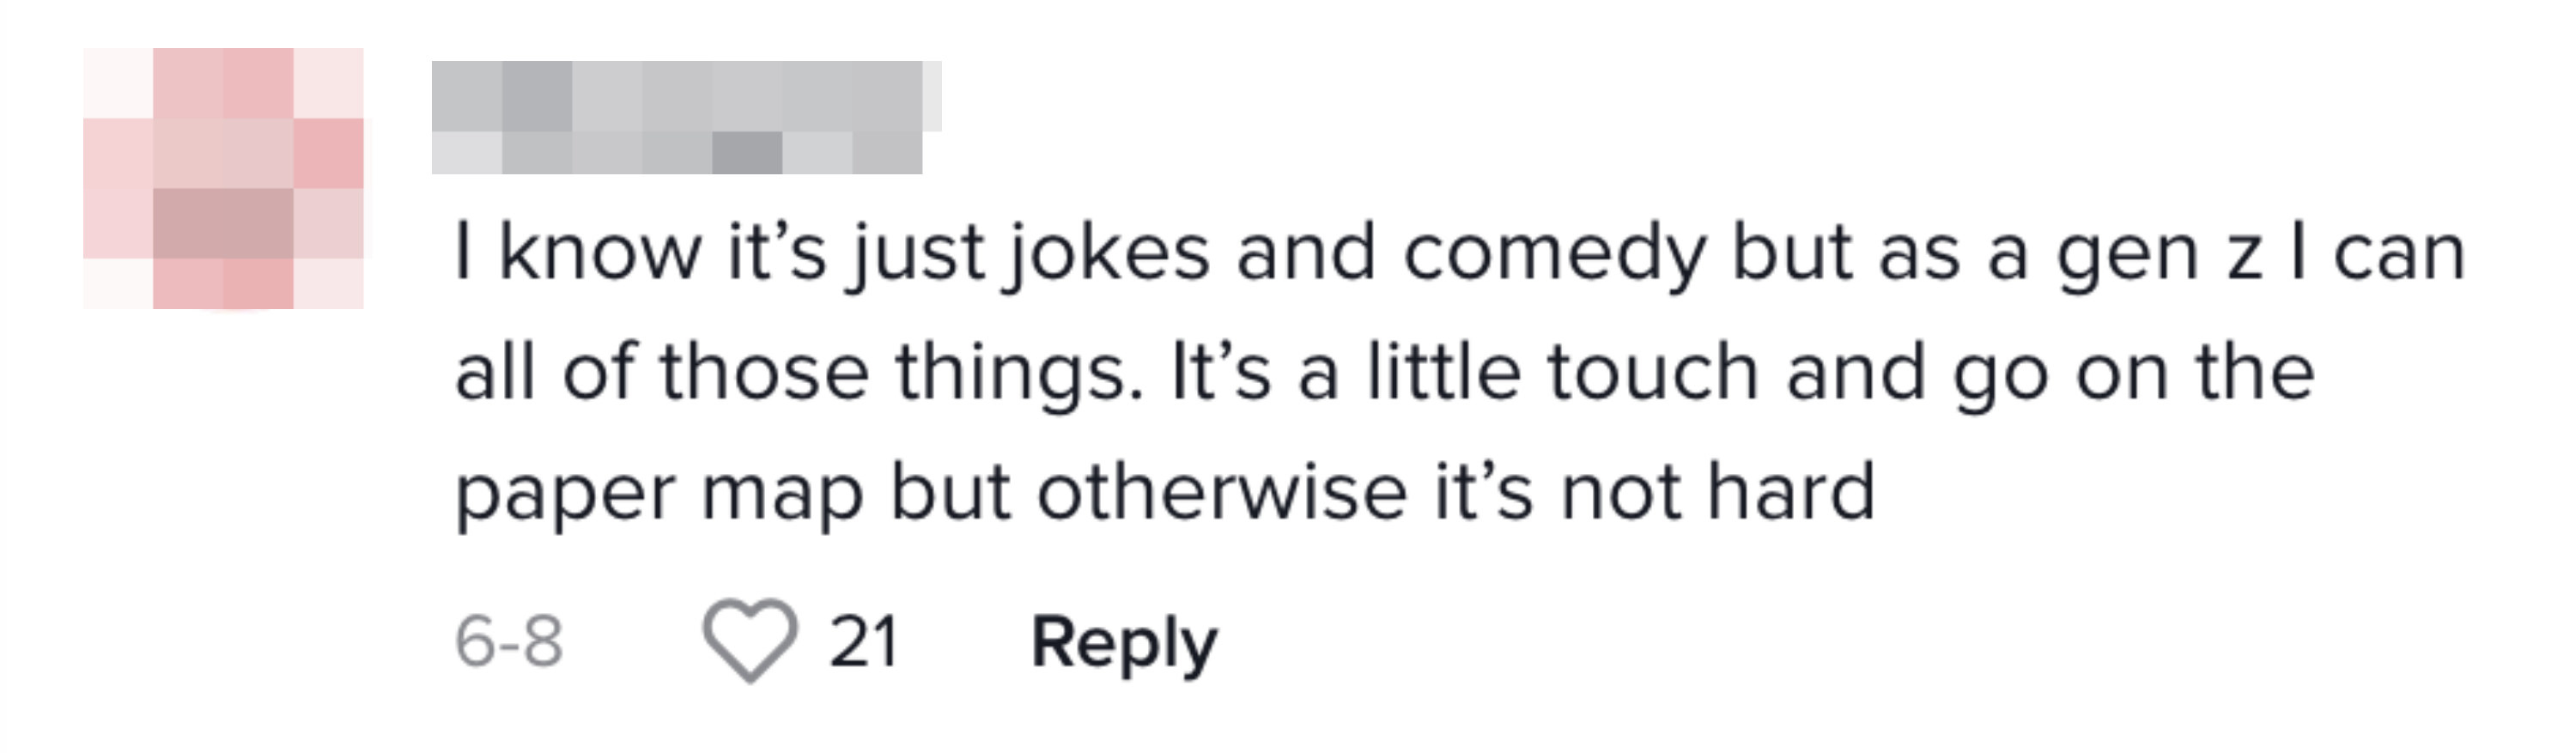 Comment reads: &quot;I know it&#x27;s just jokes and comedy, but as a Gen Z, I can do all of those things. It&#x27;s a little touch and go on the paper map, but otherwise it&#x27;s not hard&quot;